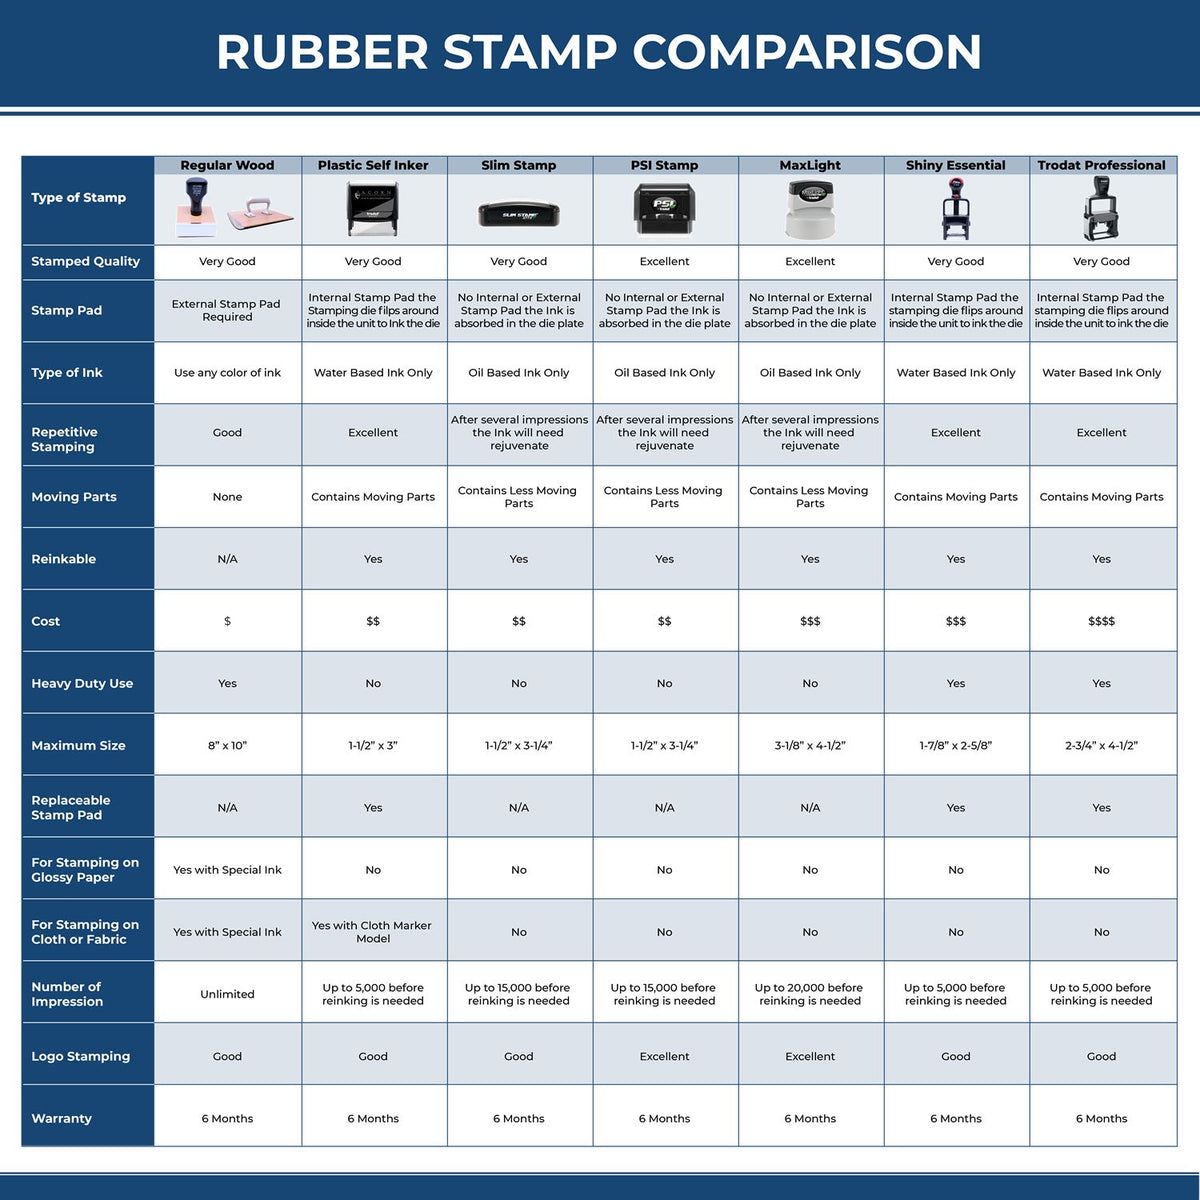 A comparison chart for the different types of mount models available for the Heavy-Duty Arizona Rectangular Notary Stamp.